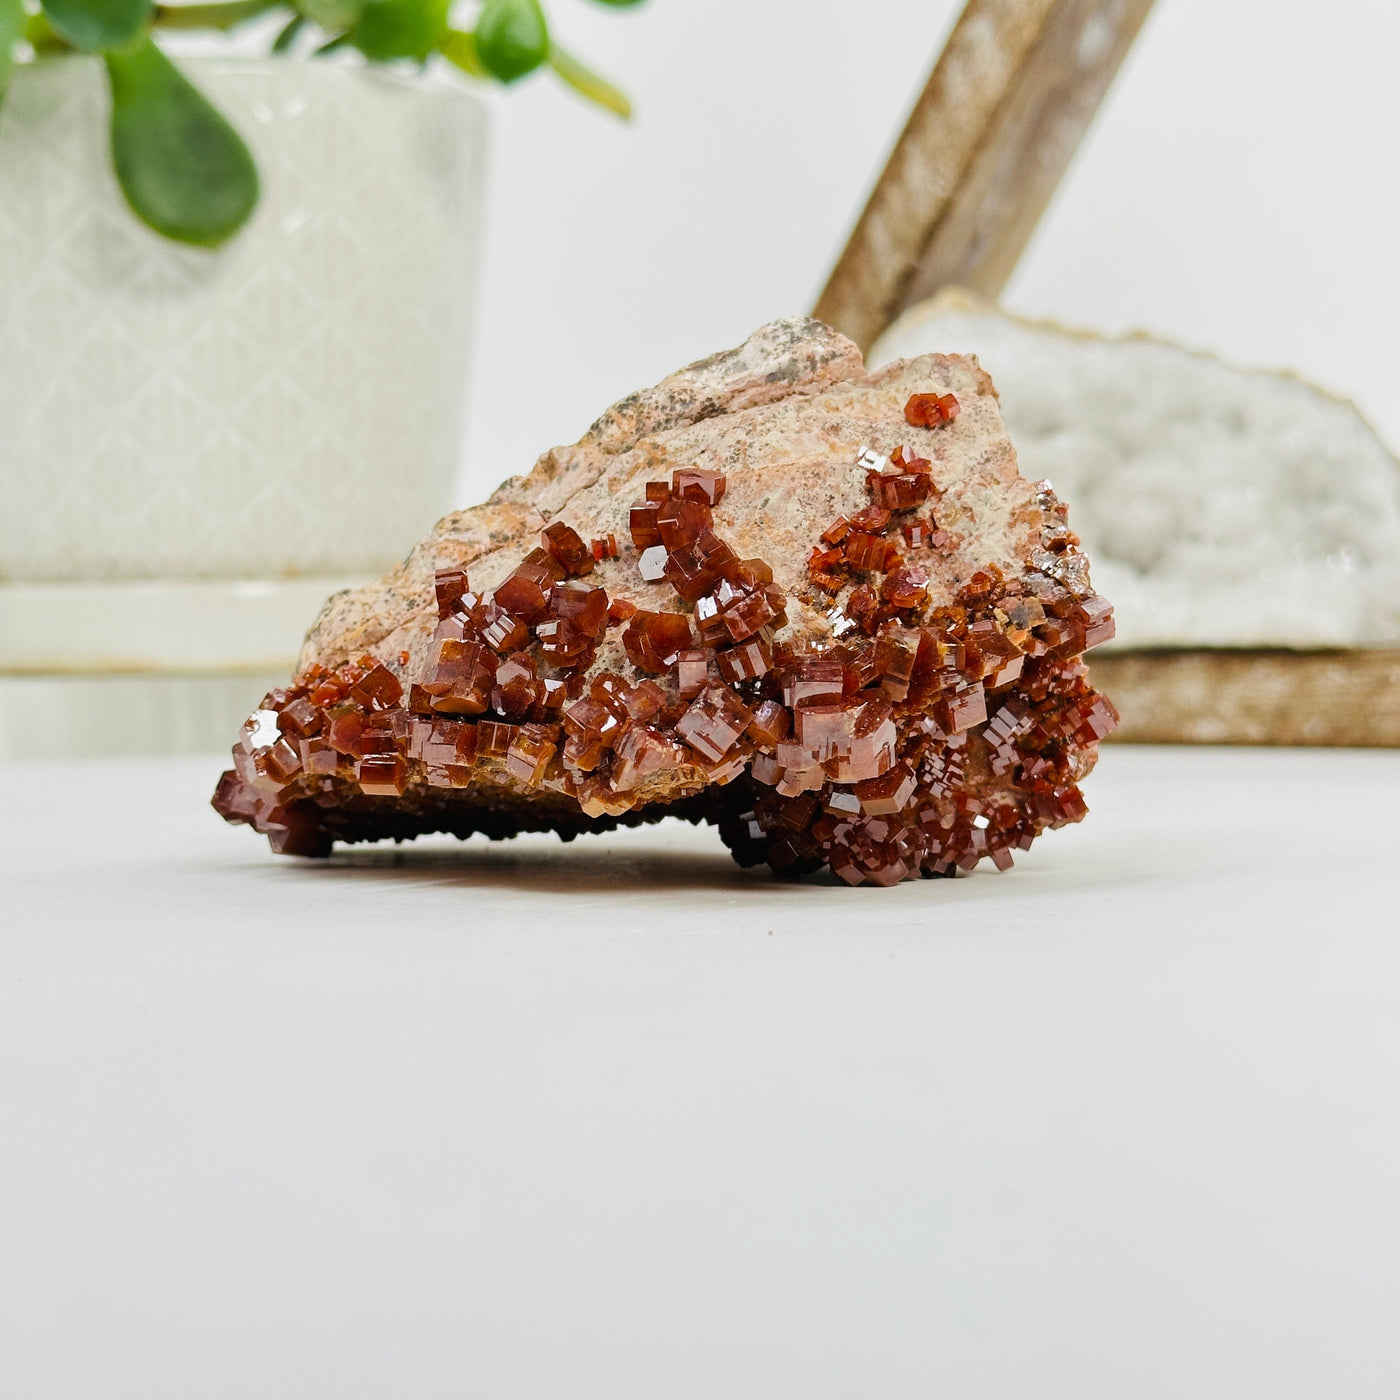 Natural vanadinite formation with decorations in the background